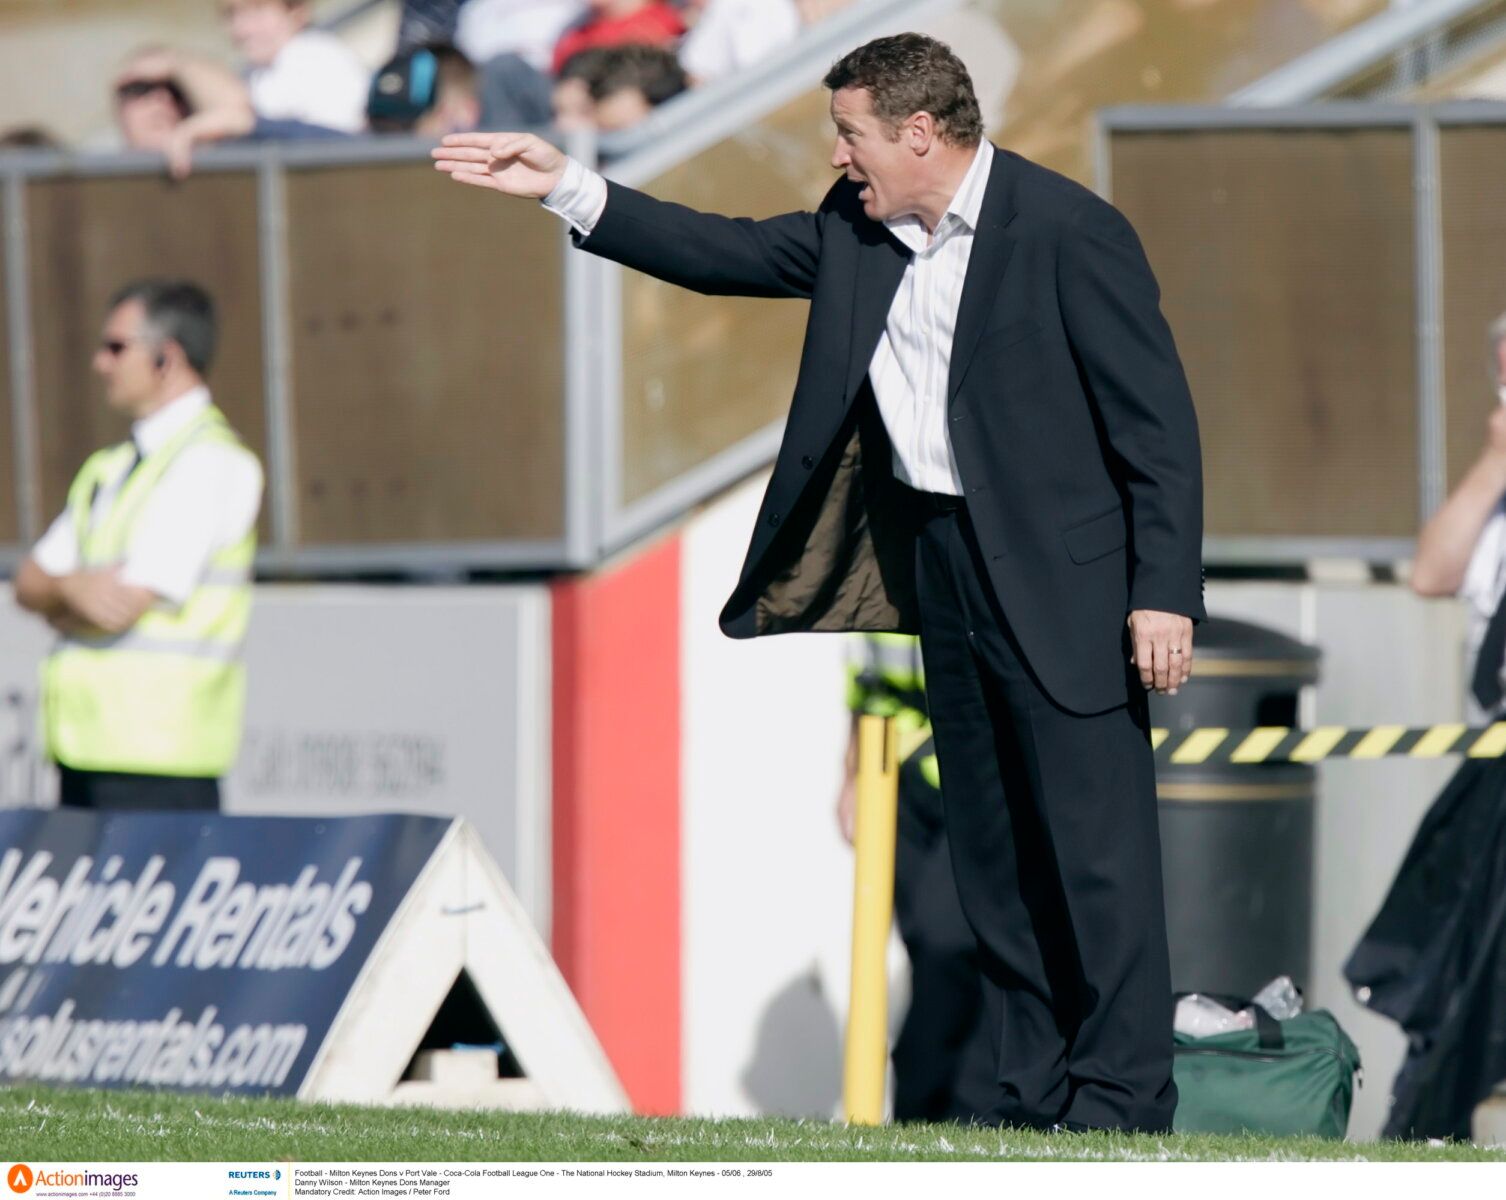 Football - Milton Keynes Dons v Port Vale - Coca-Cola Football League One - The National Hockey Stadium, Milton Keynes - 05/06 , 29/8/05 
Danny Wilson - Milton Keynes Dons Manager 
Mandatory Credit: Action Images / Peter Ford